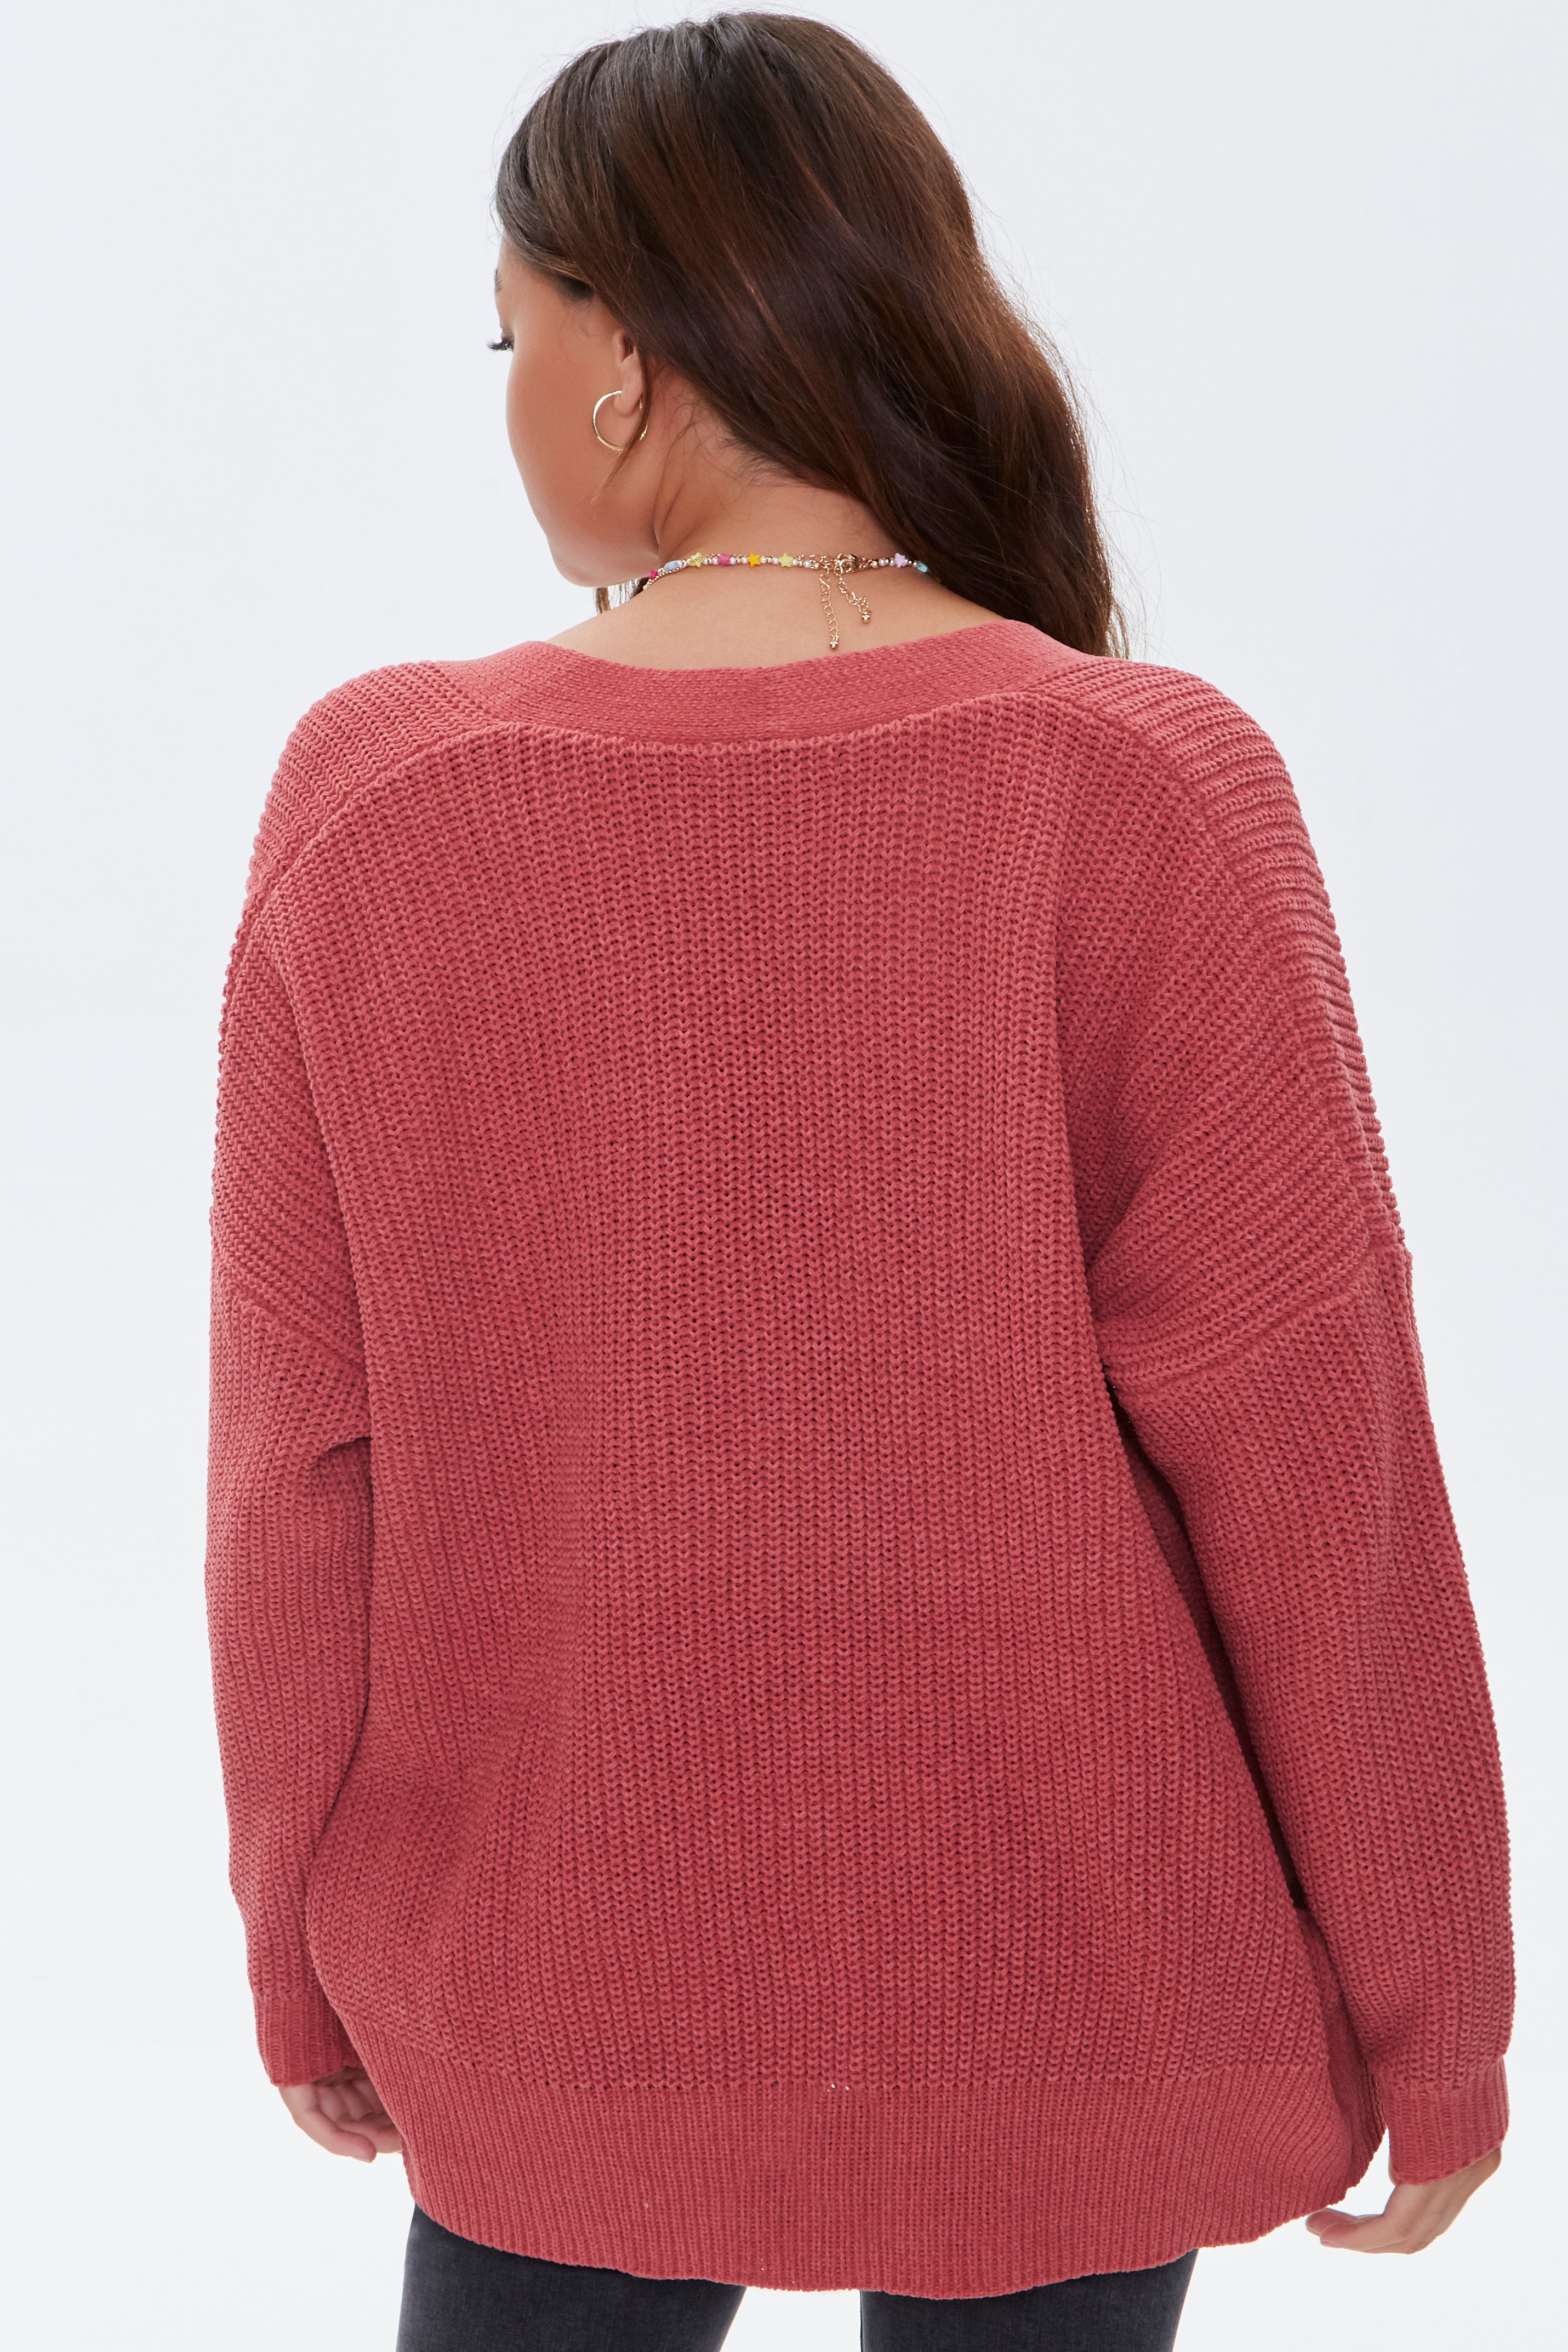 Berry Ribbed Knit Cardigan Sweater 3